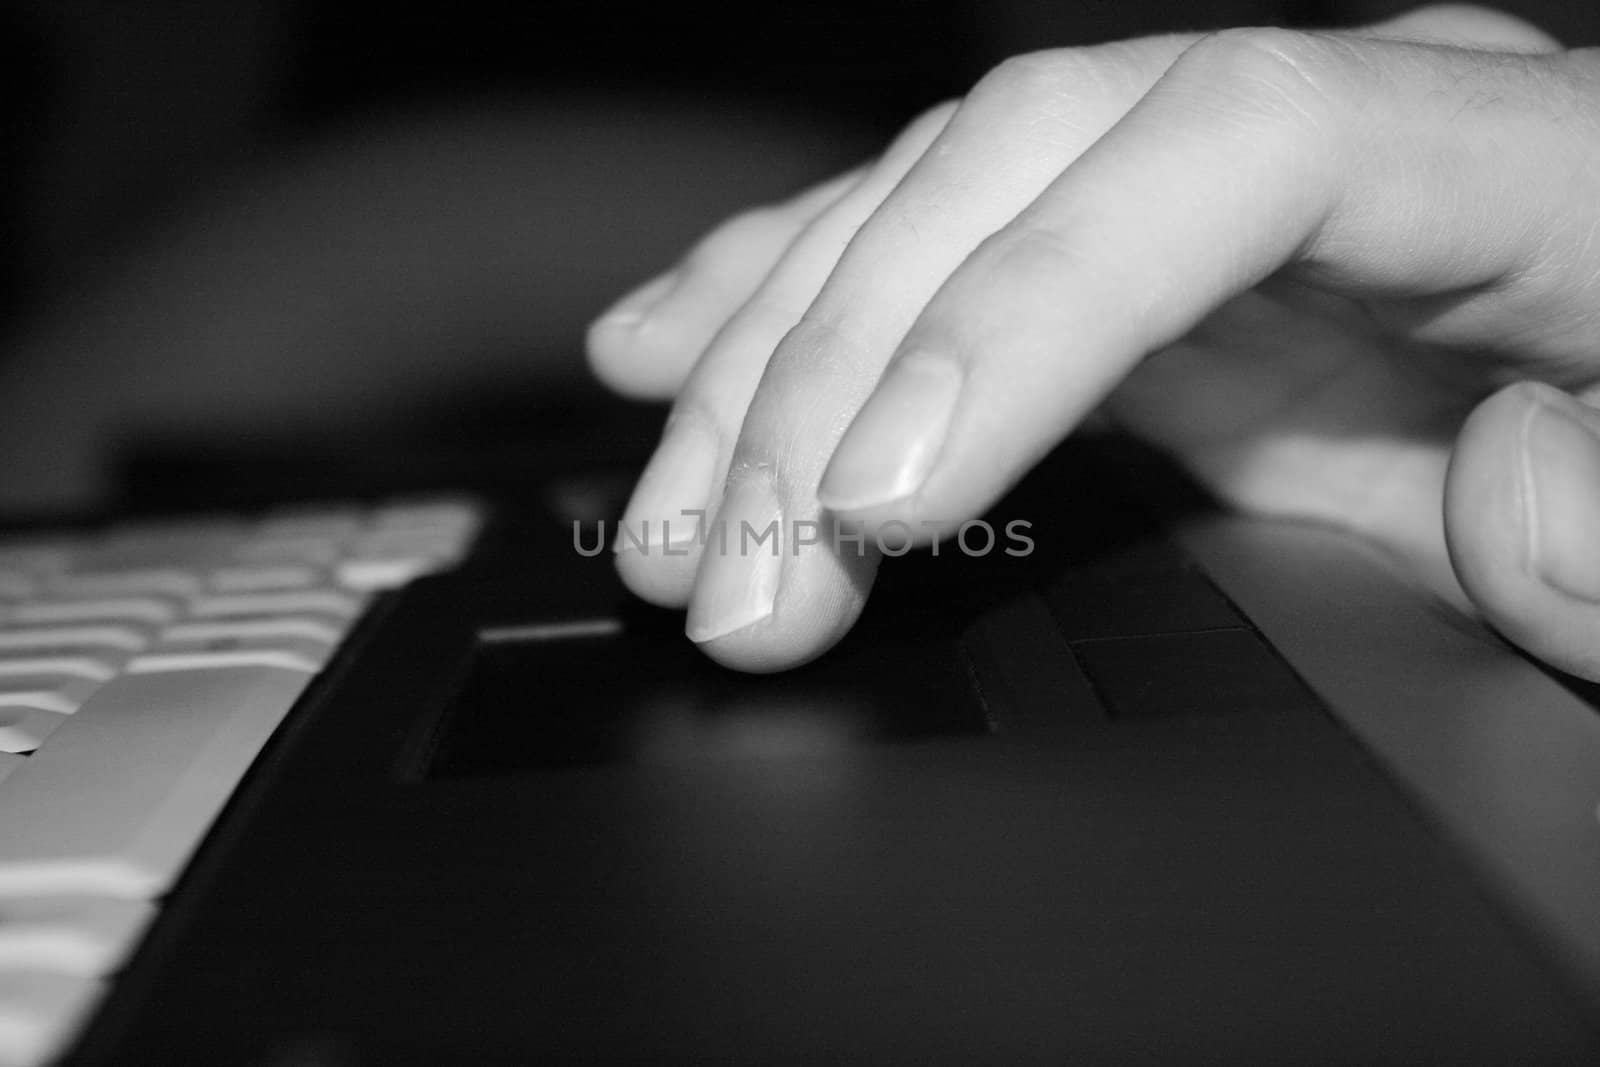 Fingers touching a notebook touchpad by domencolja